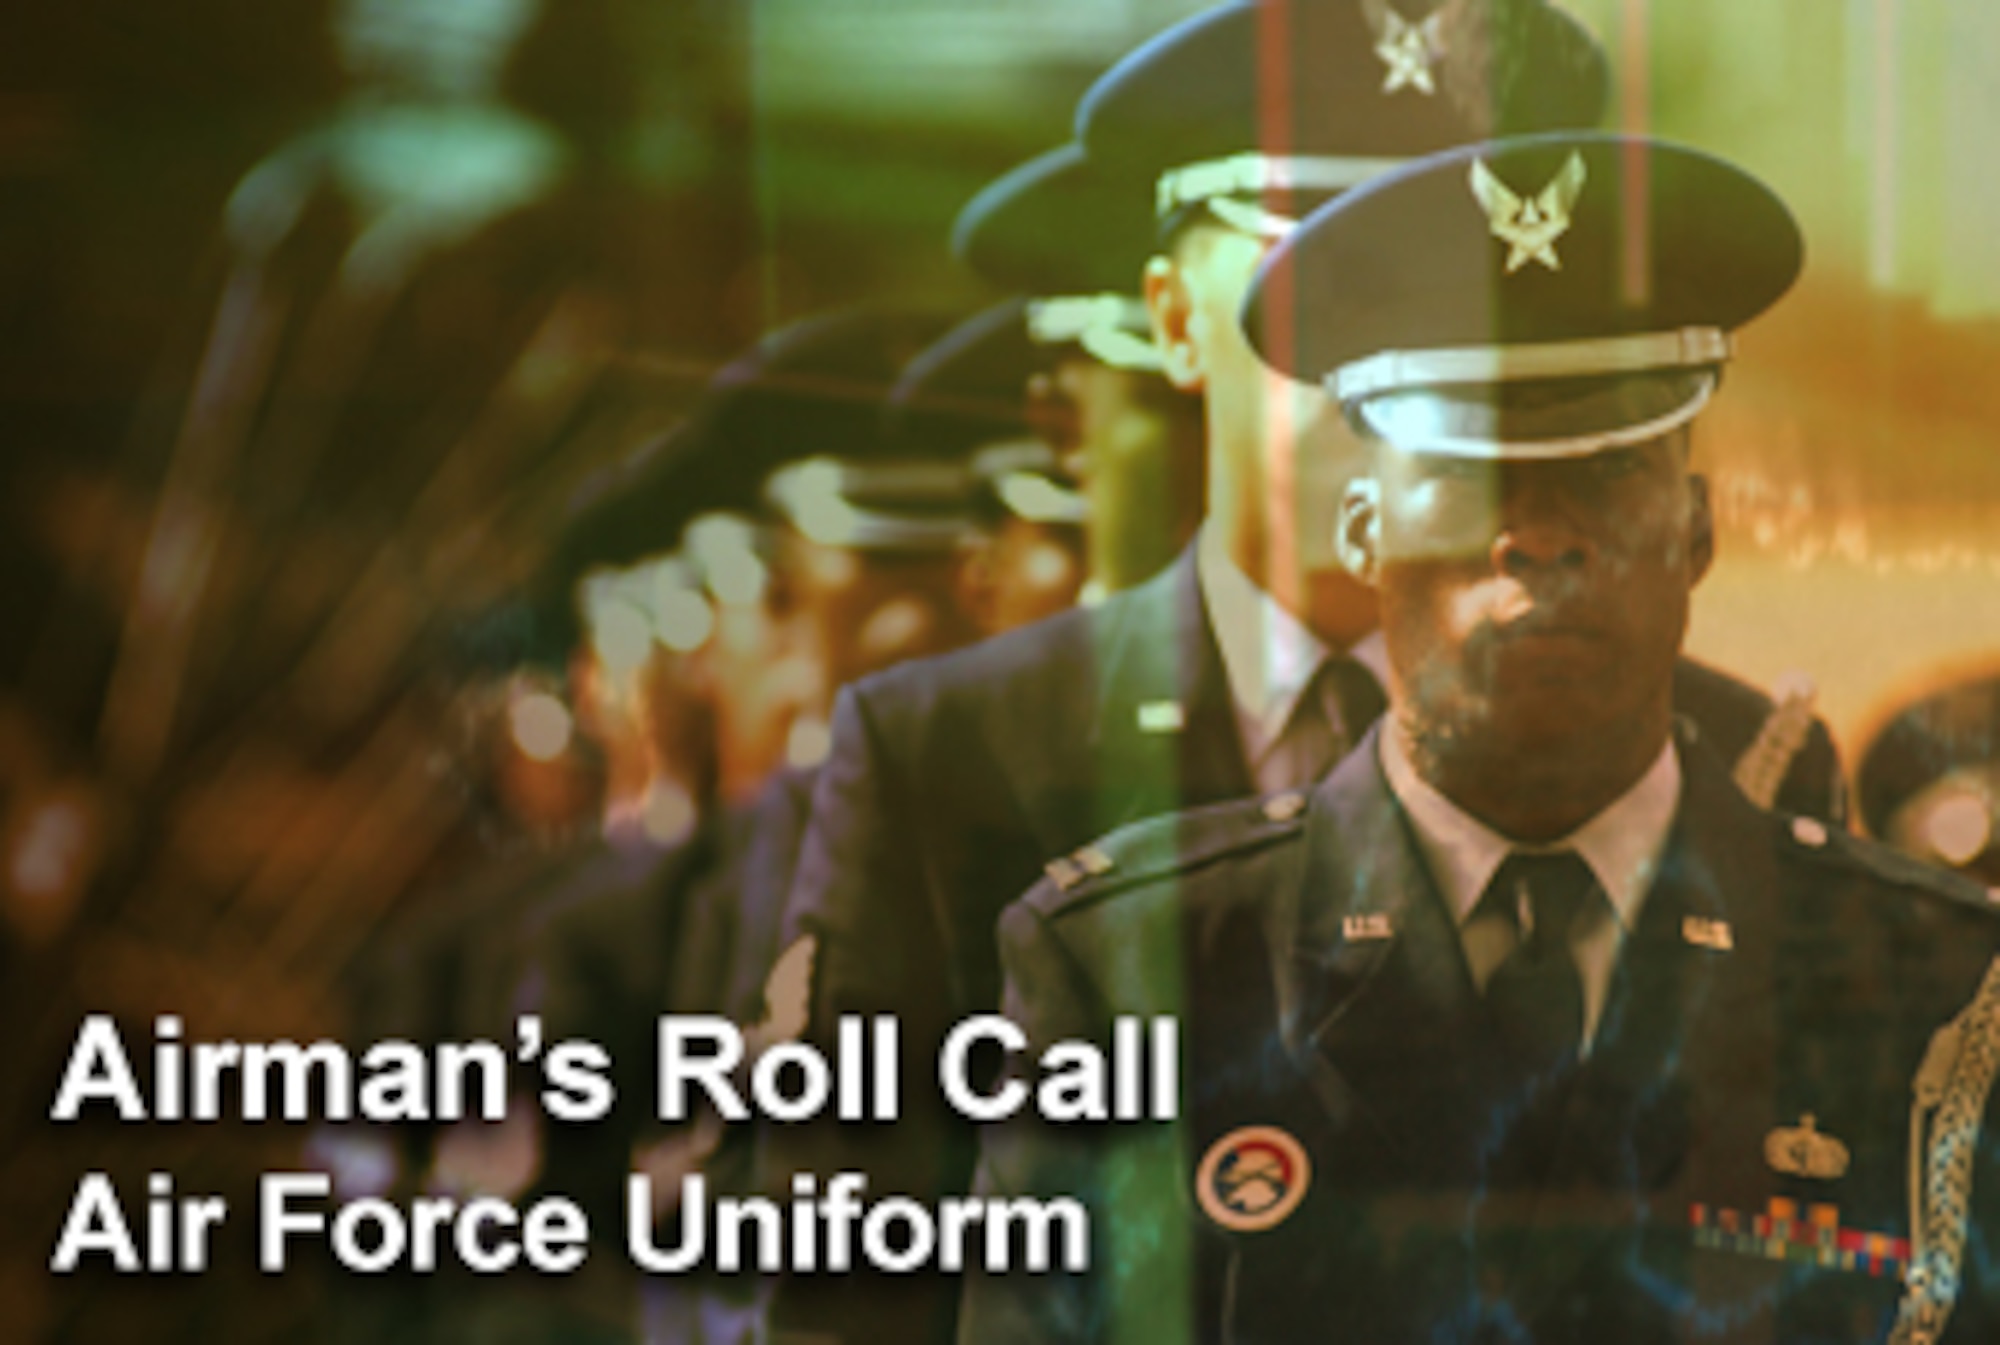 This week's Airman's Roll Call focuses on Air Force Chief of Staff Gen. Norton A. Schwartz's decision last week to defer a decision on the heritage service coat until summer 2009. (U.S. Air Force photo illustration/Mike Carabajal) 
